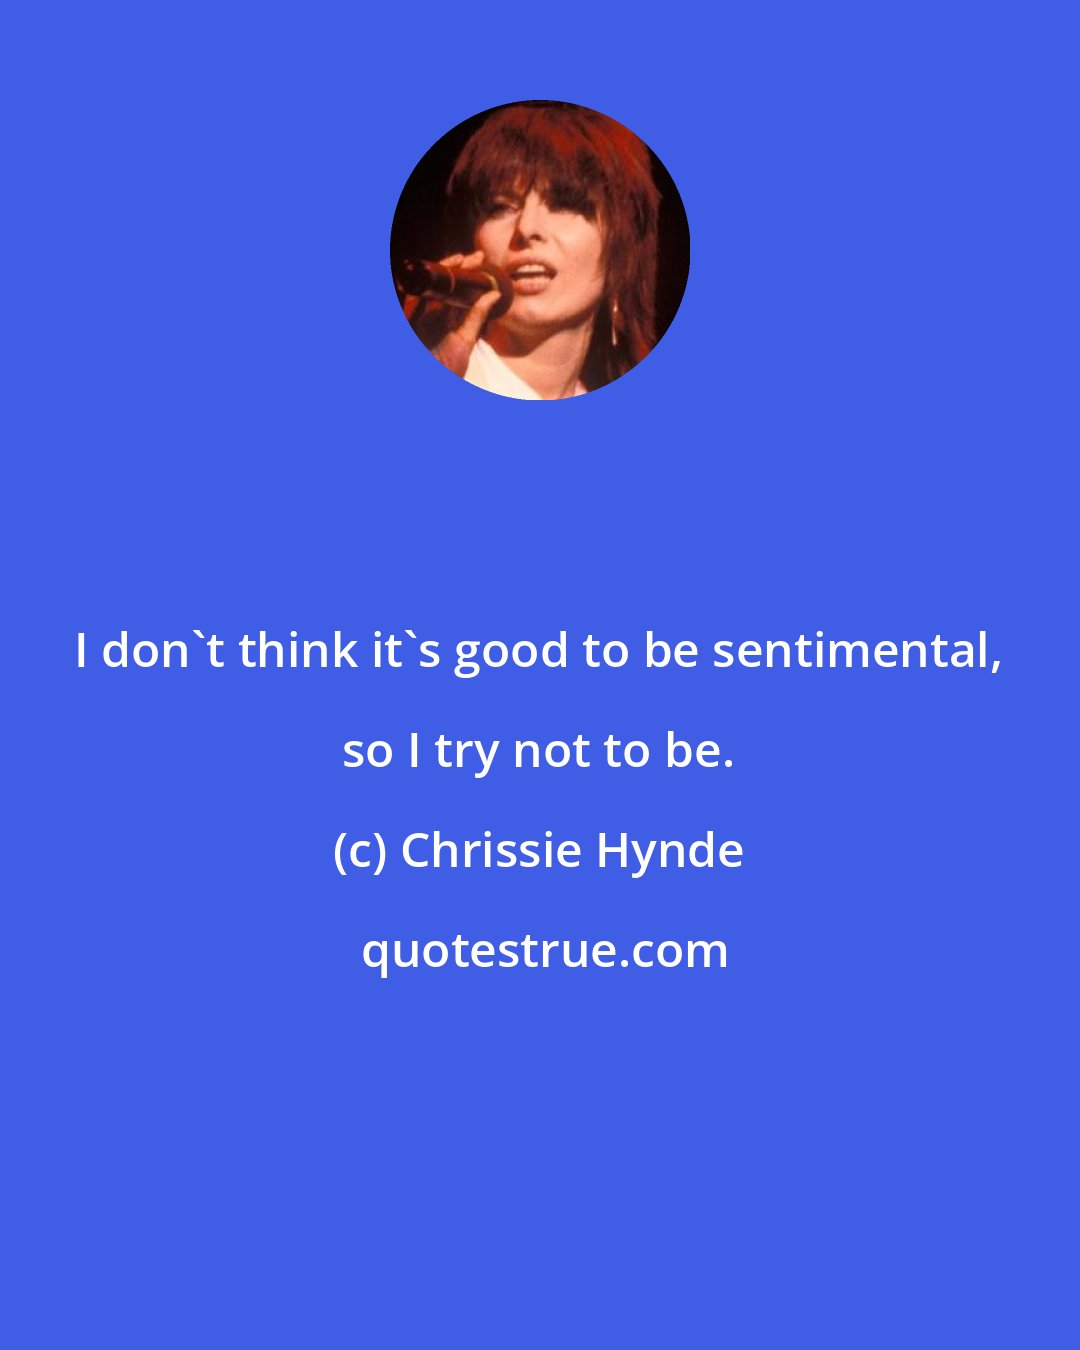 Chrissie Hynde: I don't think it's good to be sentimental, so I try not to be.